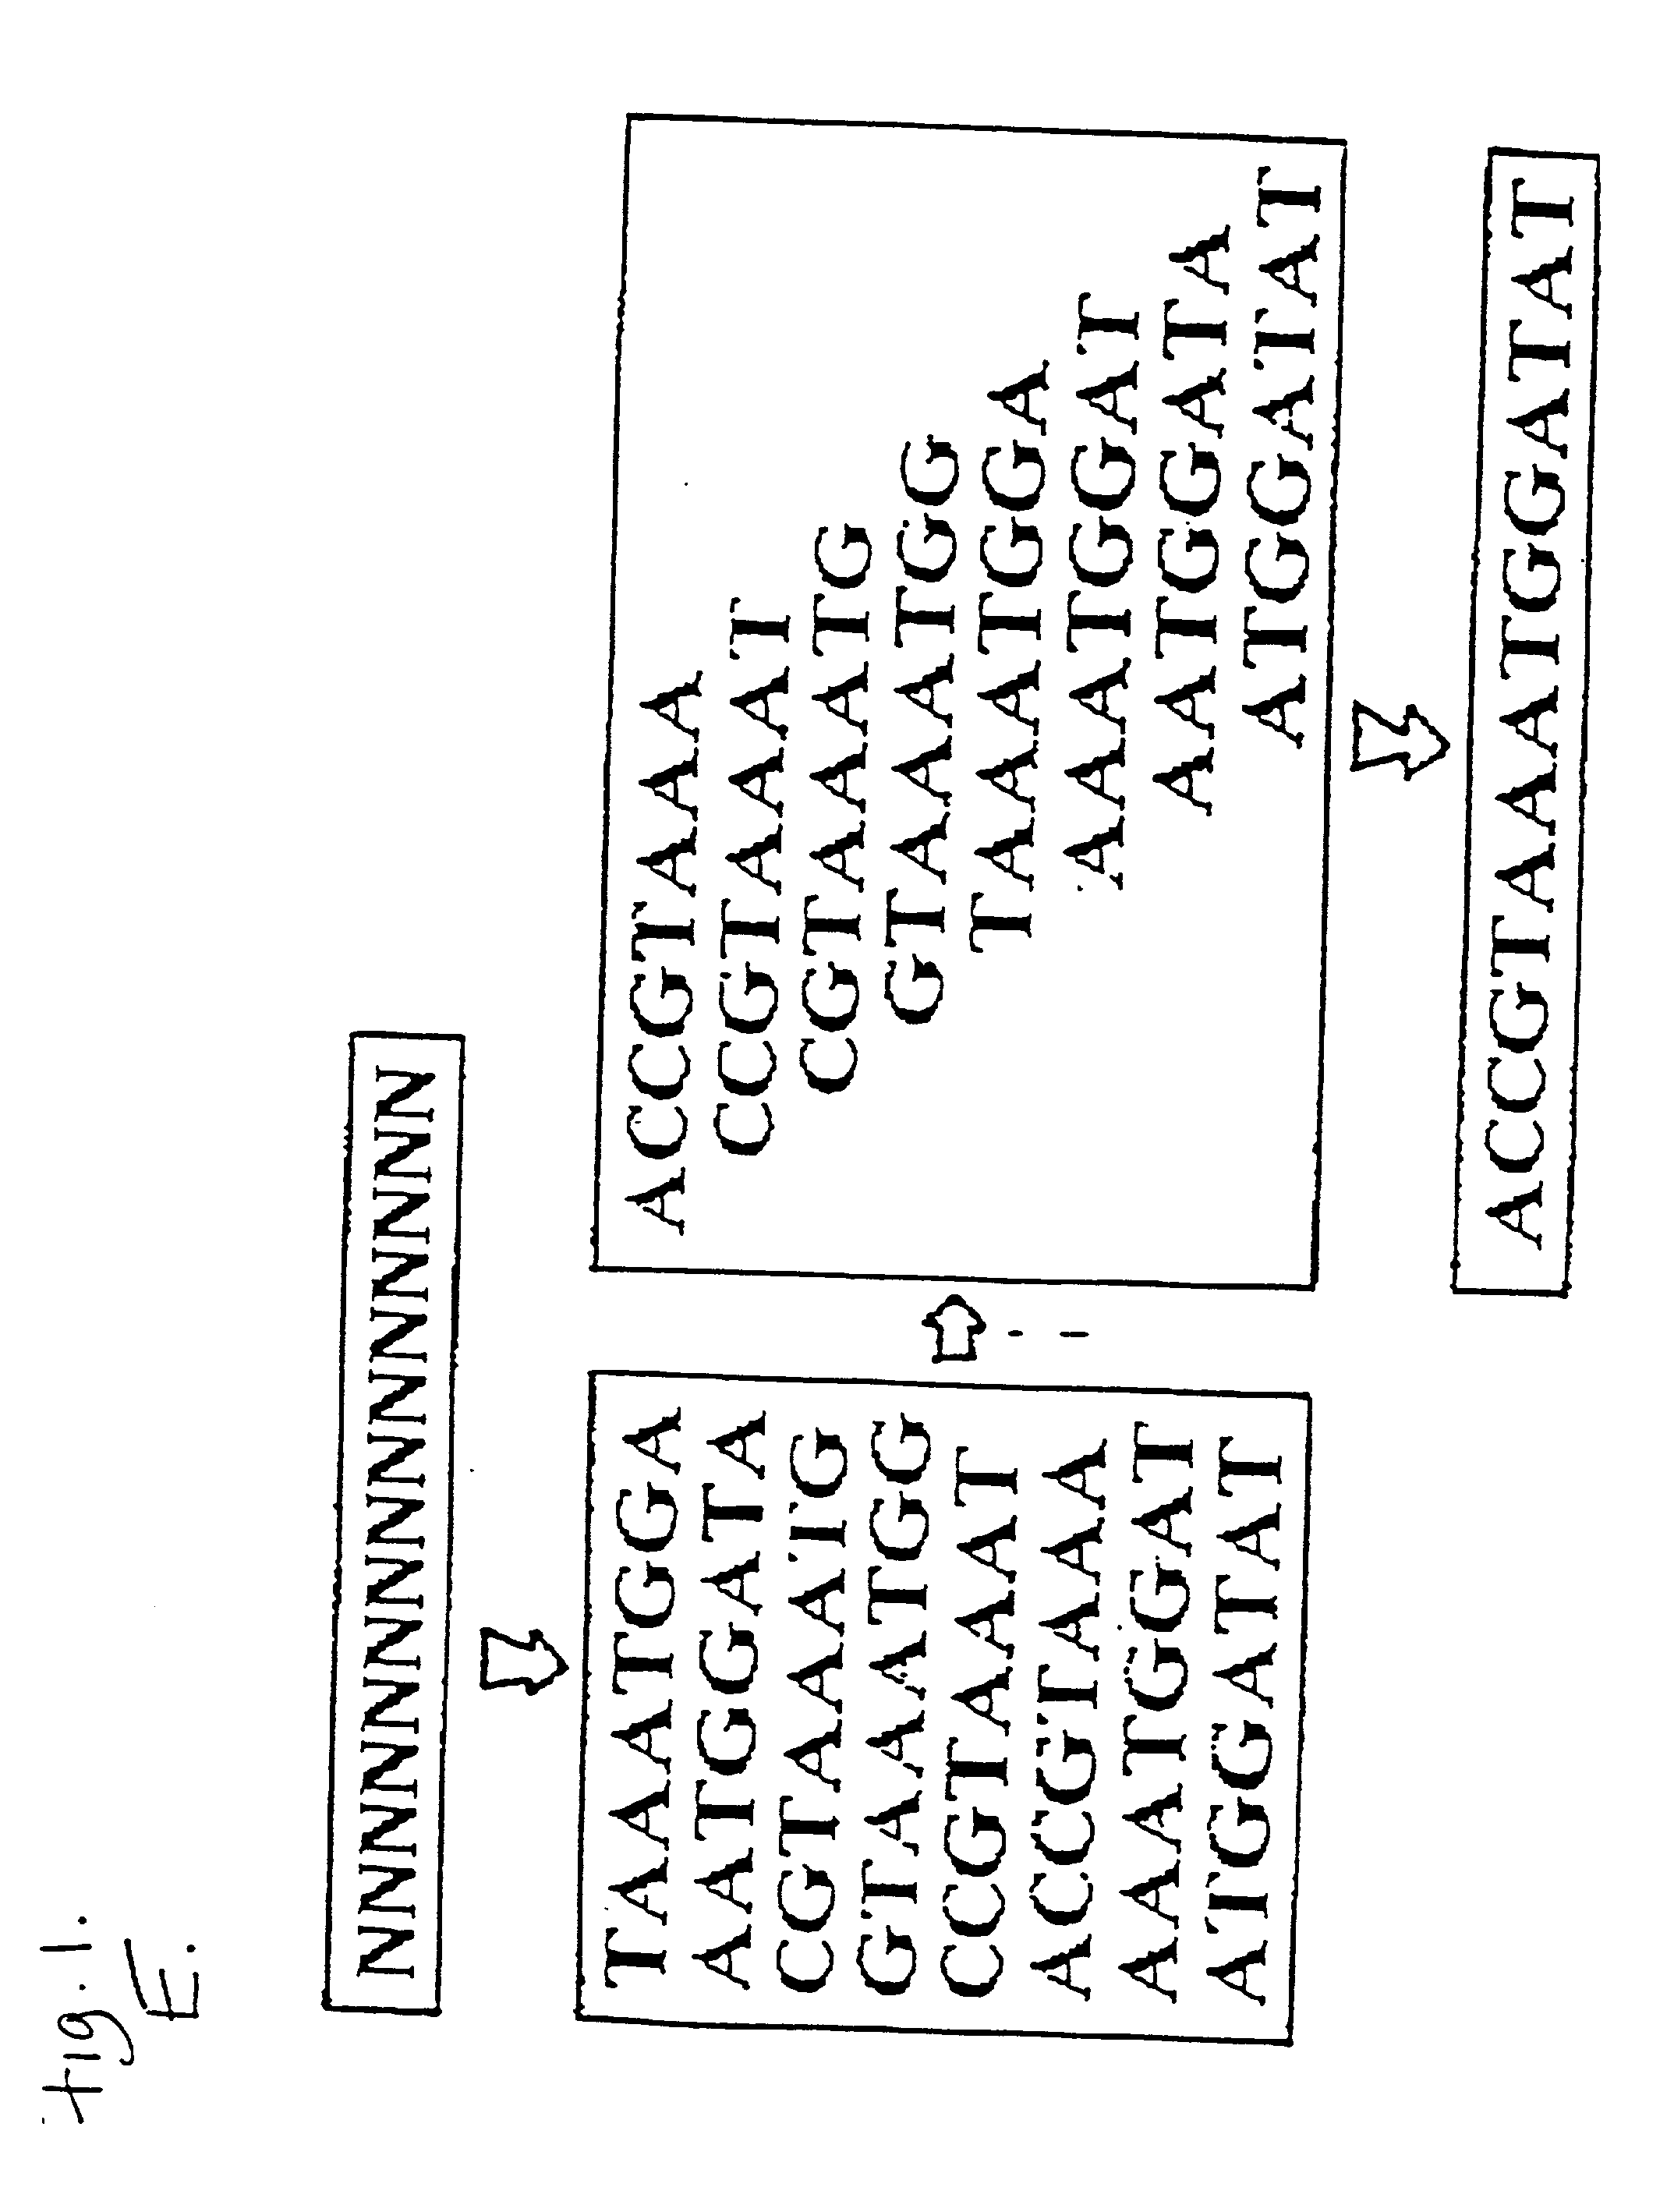 Method of sequencing by hybridization of oligonucleotide probes